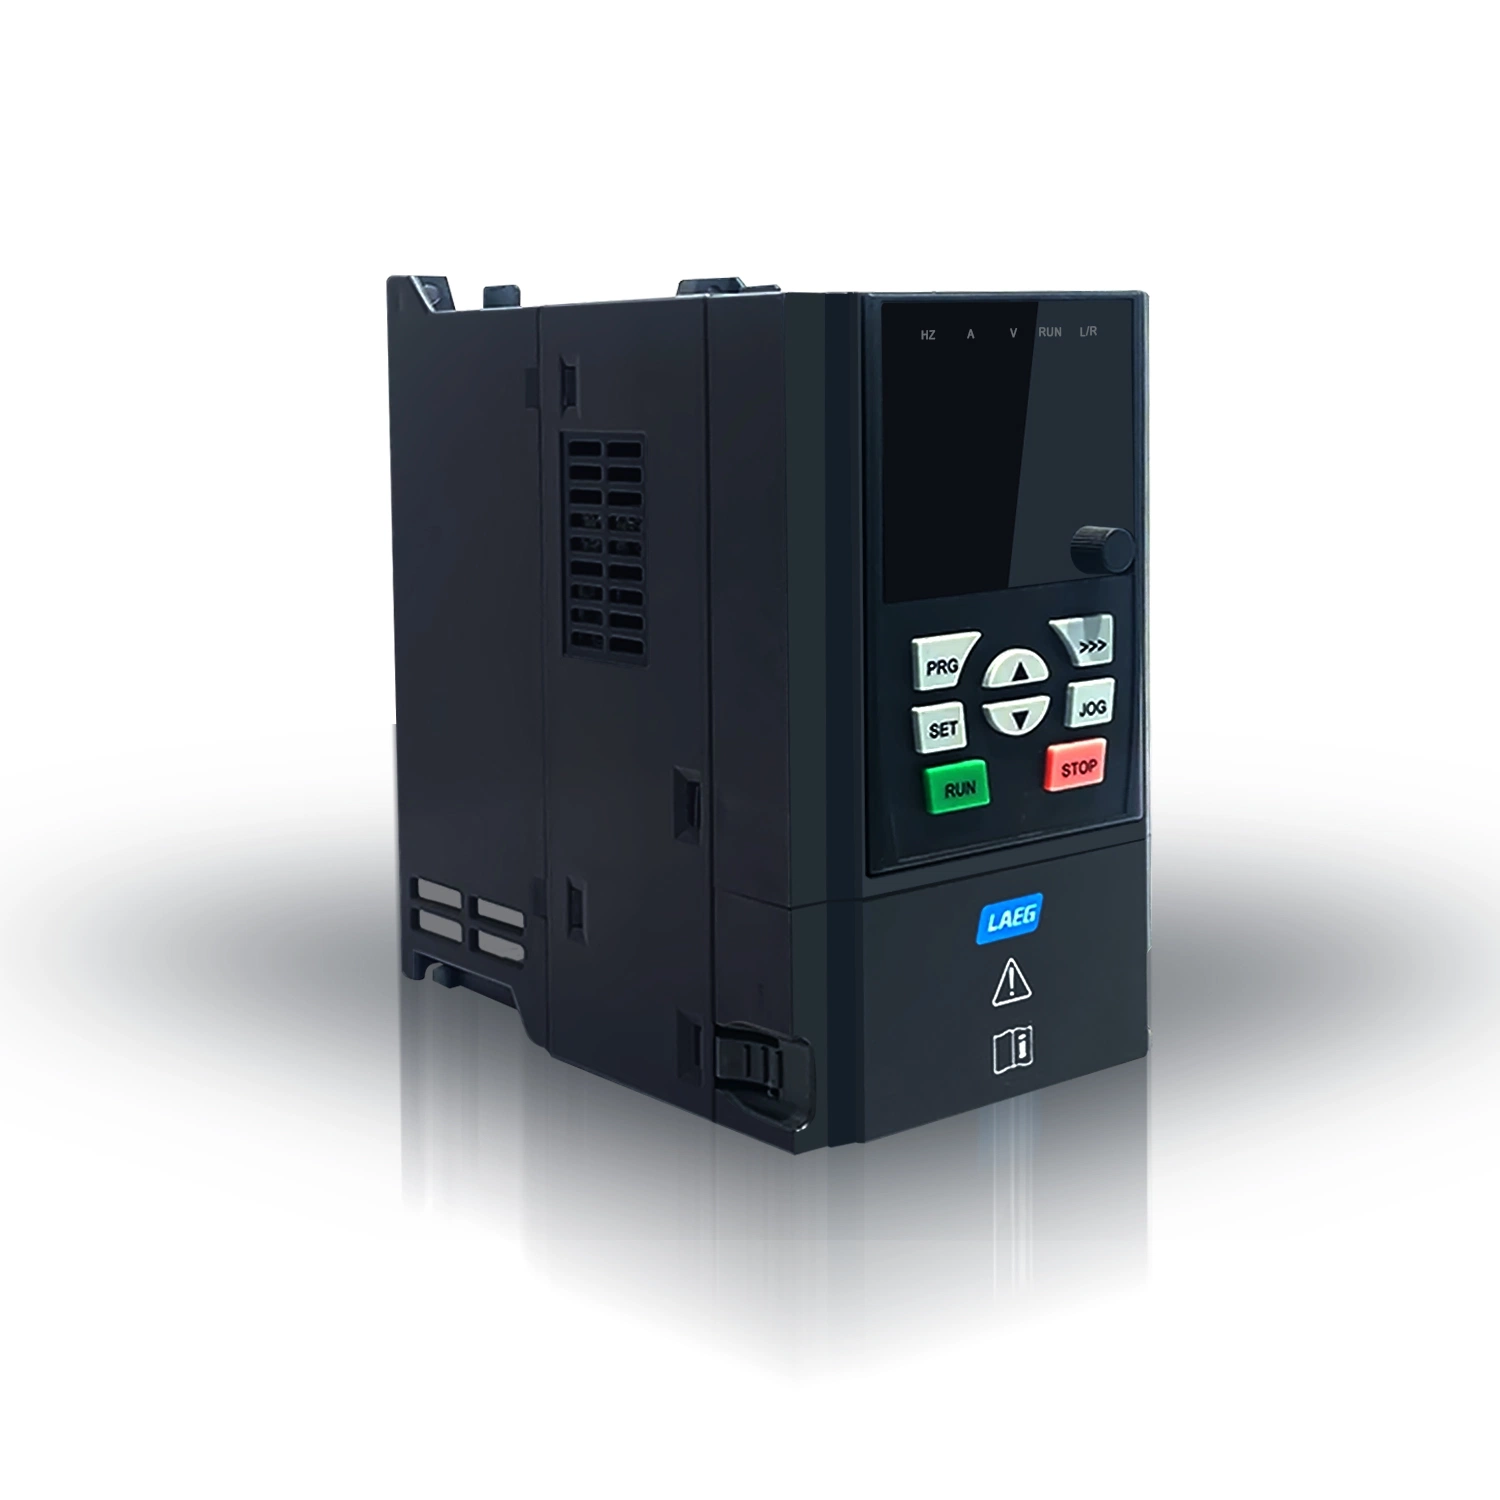 Ld 320 Vector Inverter, 0.75kw Frequency Inverter AC Drive